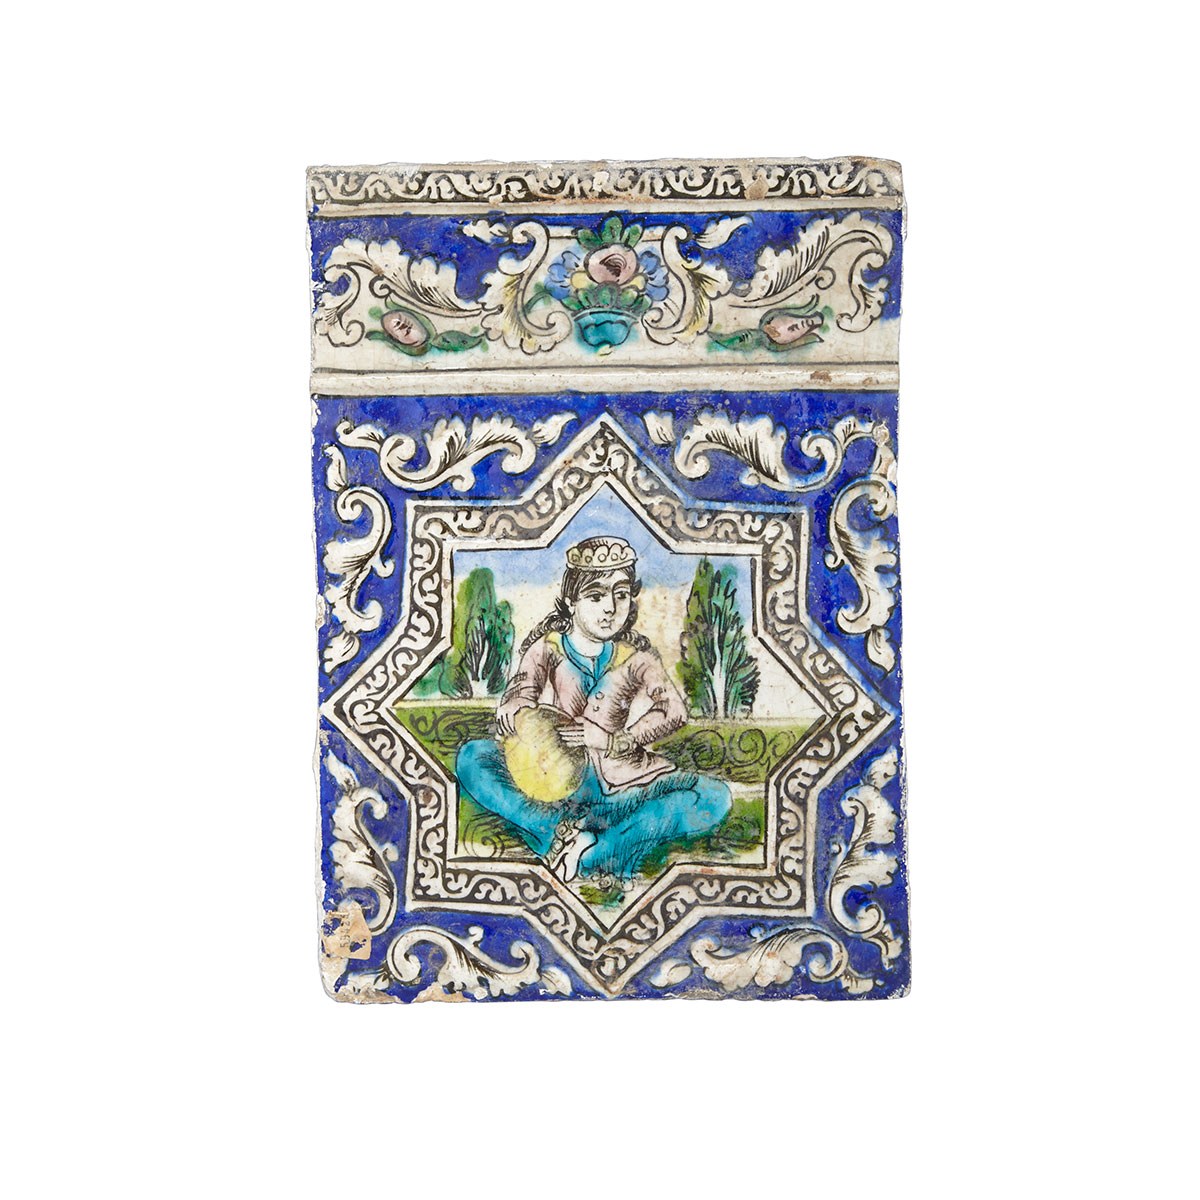 Pair of Polychromed Architectural Pottery Tiles, Persia/Qajar, Late 19th Century